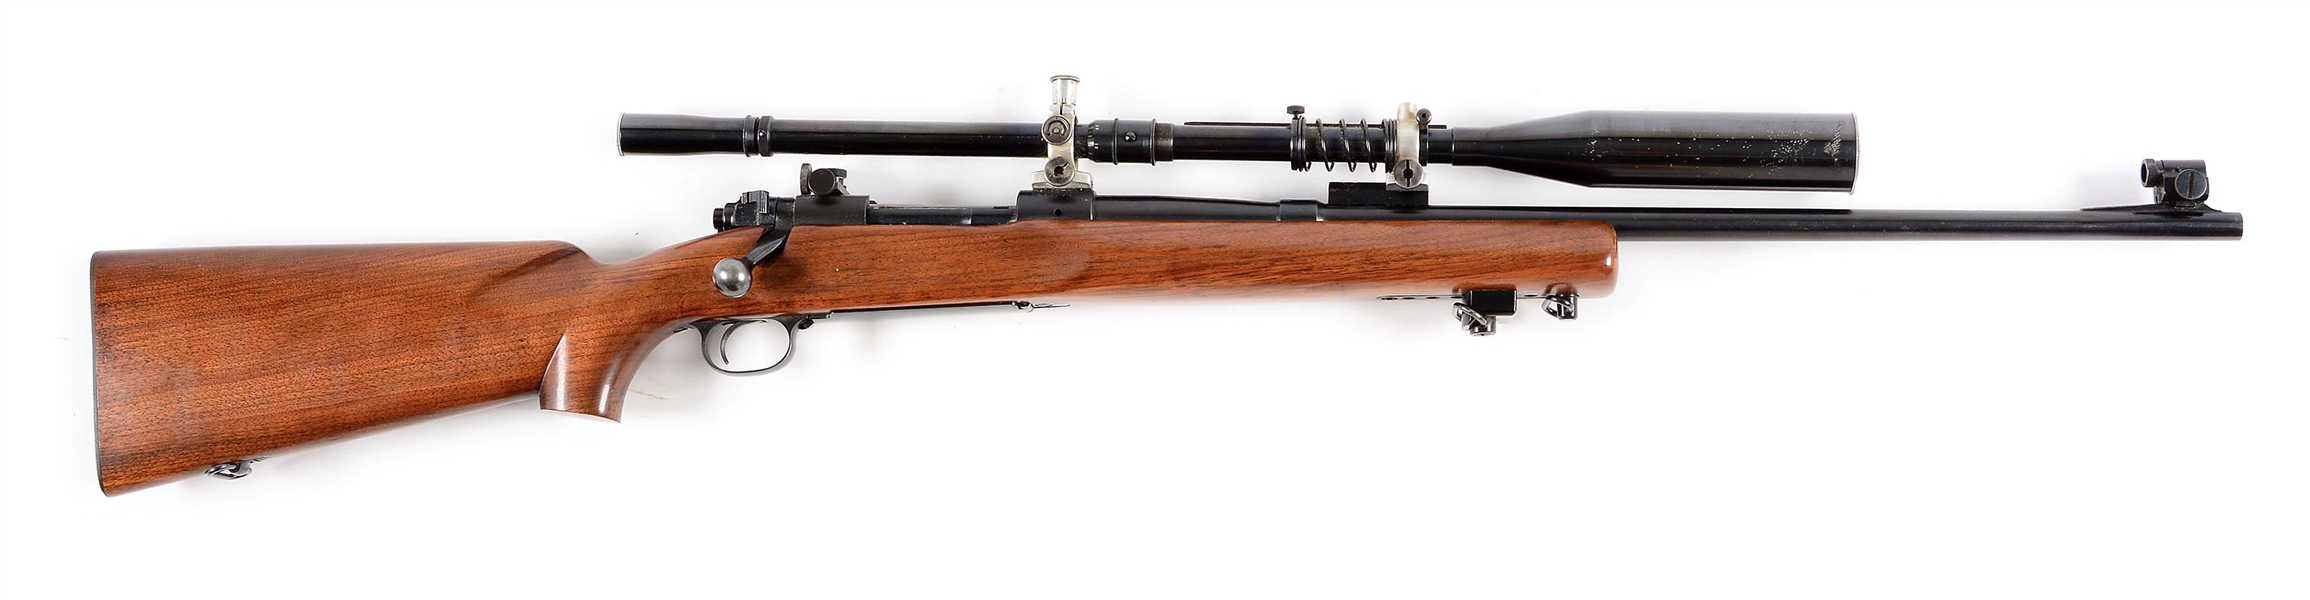 (C) RARE WINCHESTER MODEL 70 NATIONAL MATCH BOLT ACTION RIFLE (1952).